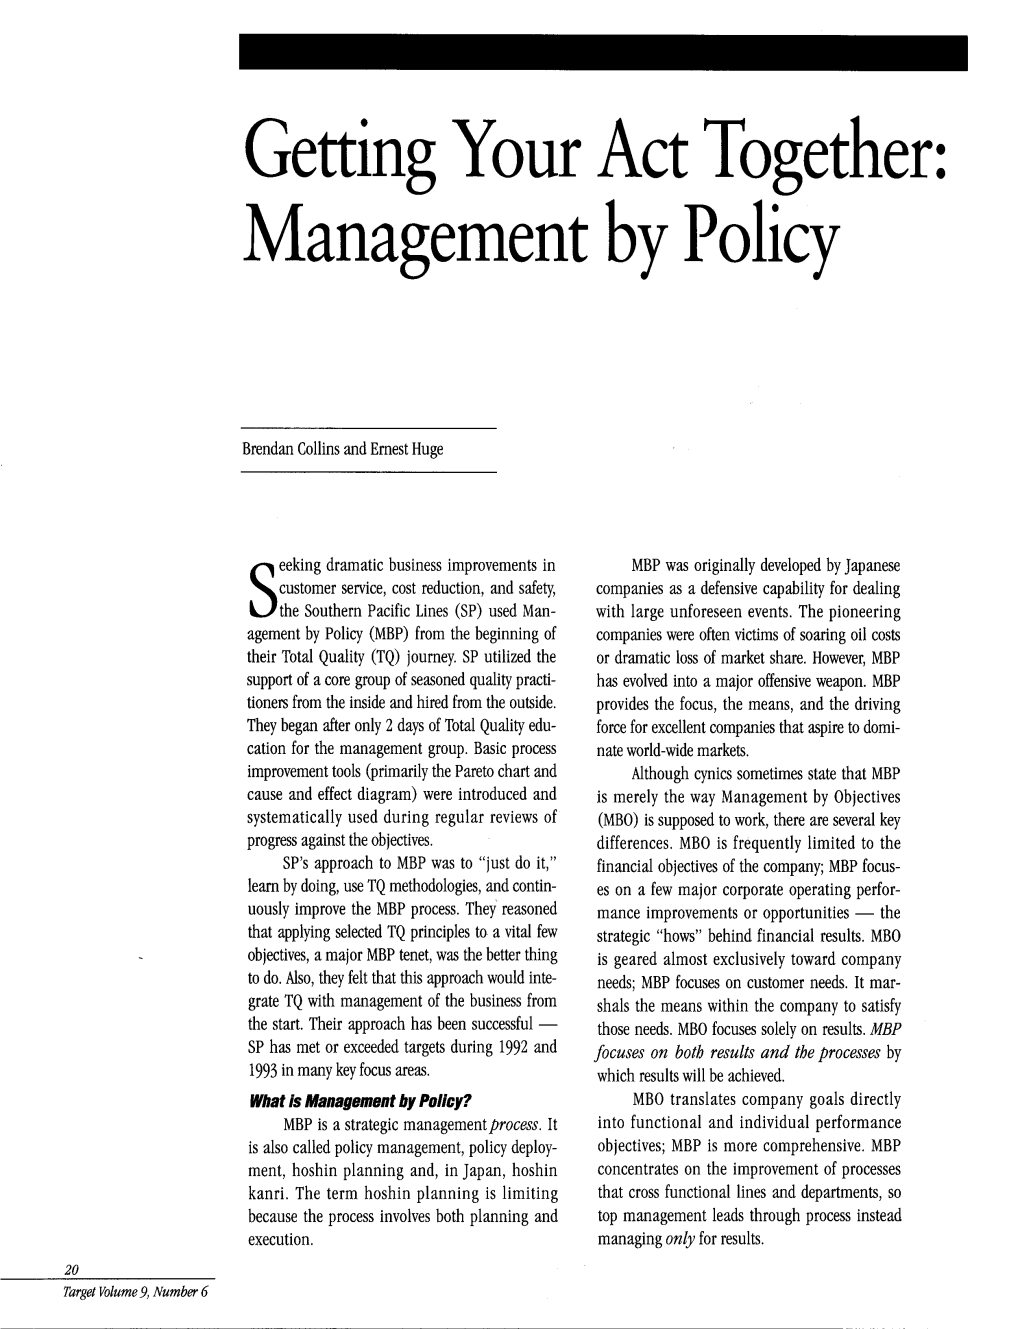 Getting Your Act Together: Management by Policy